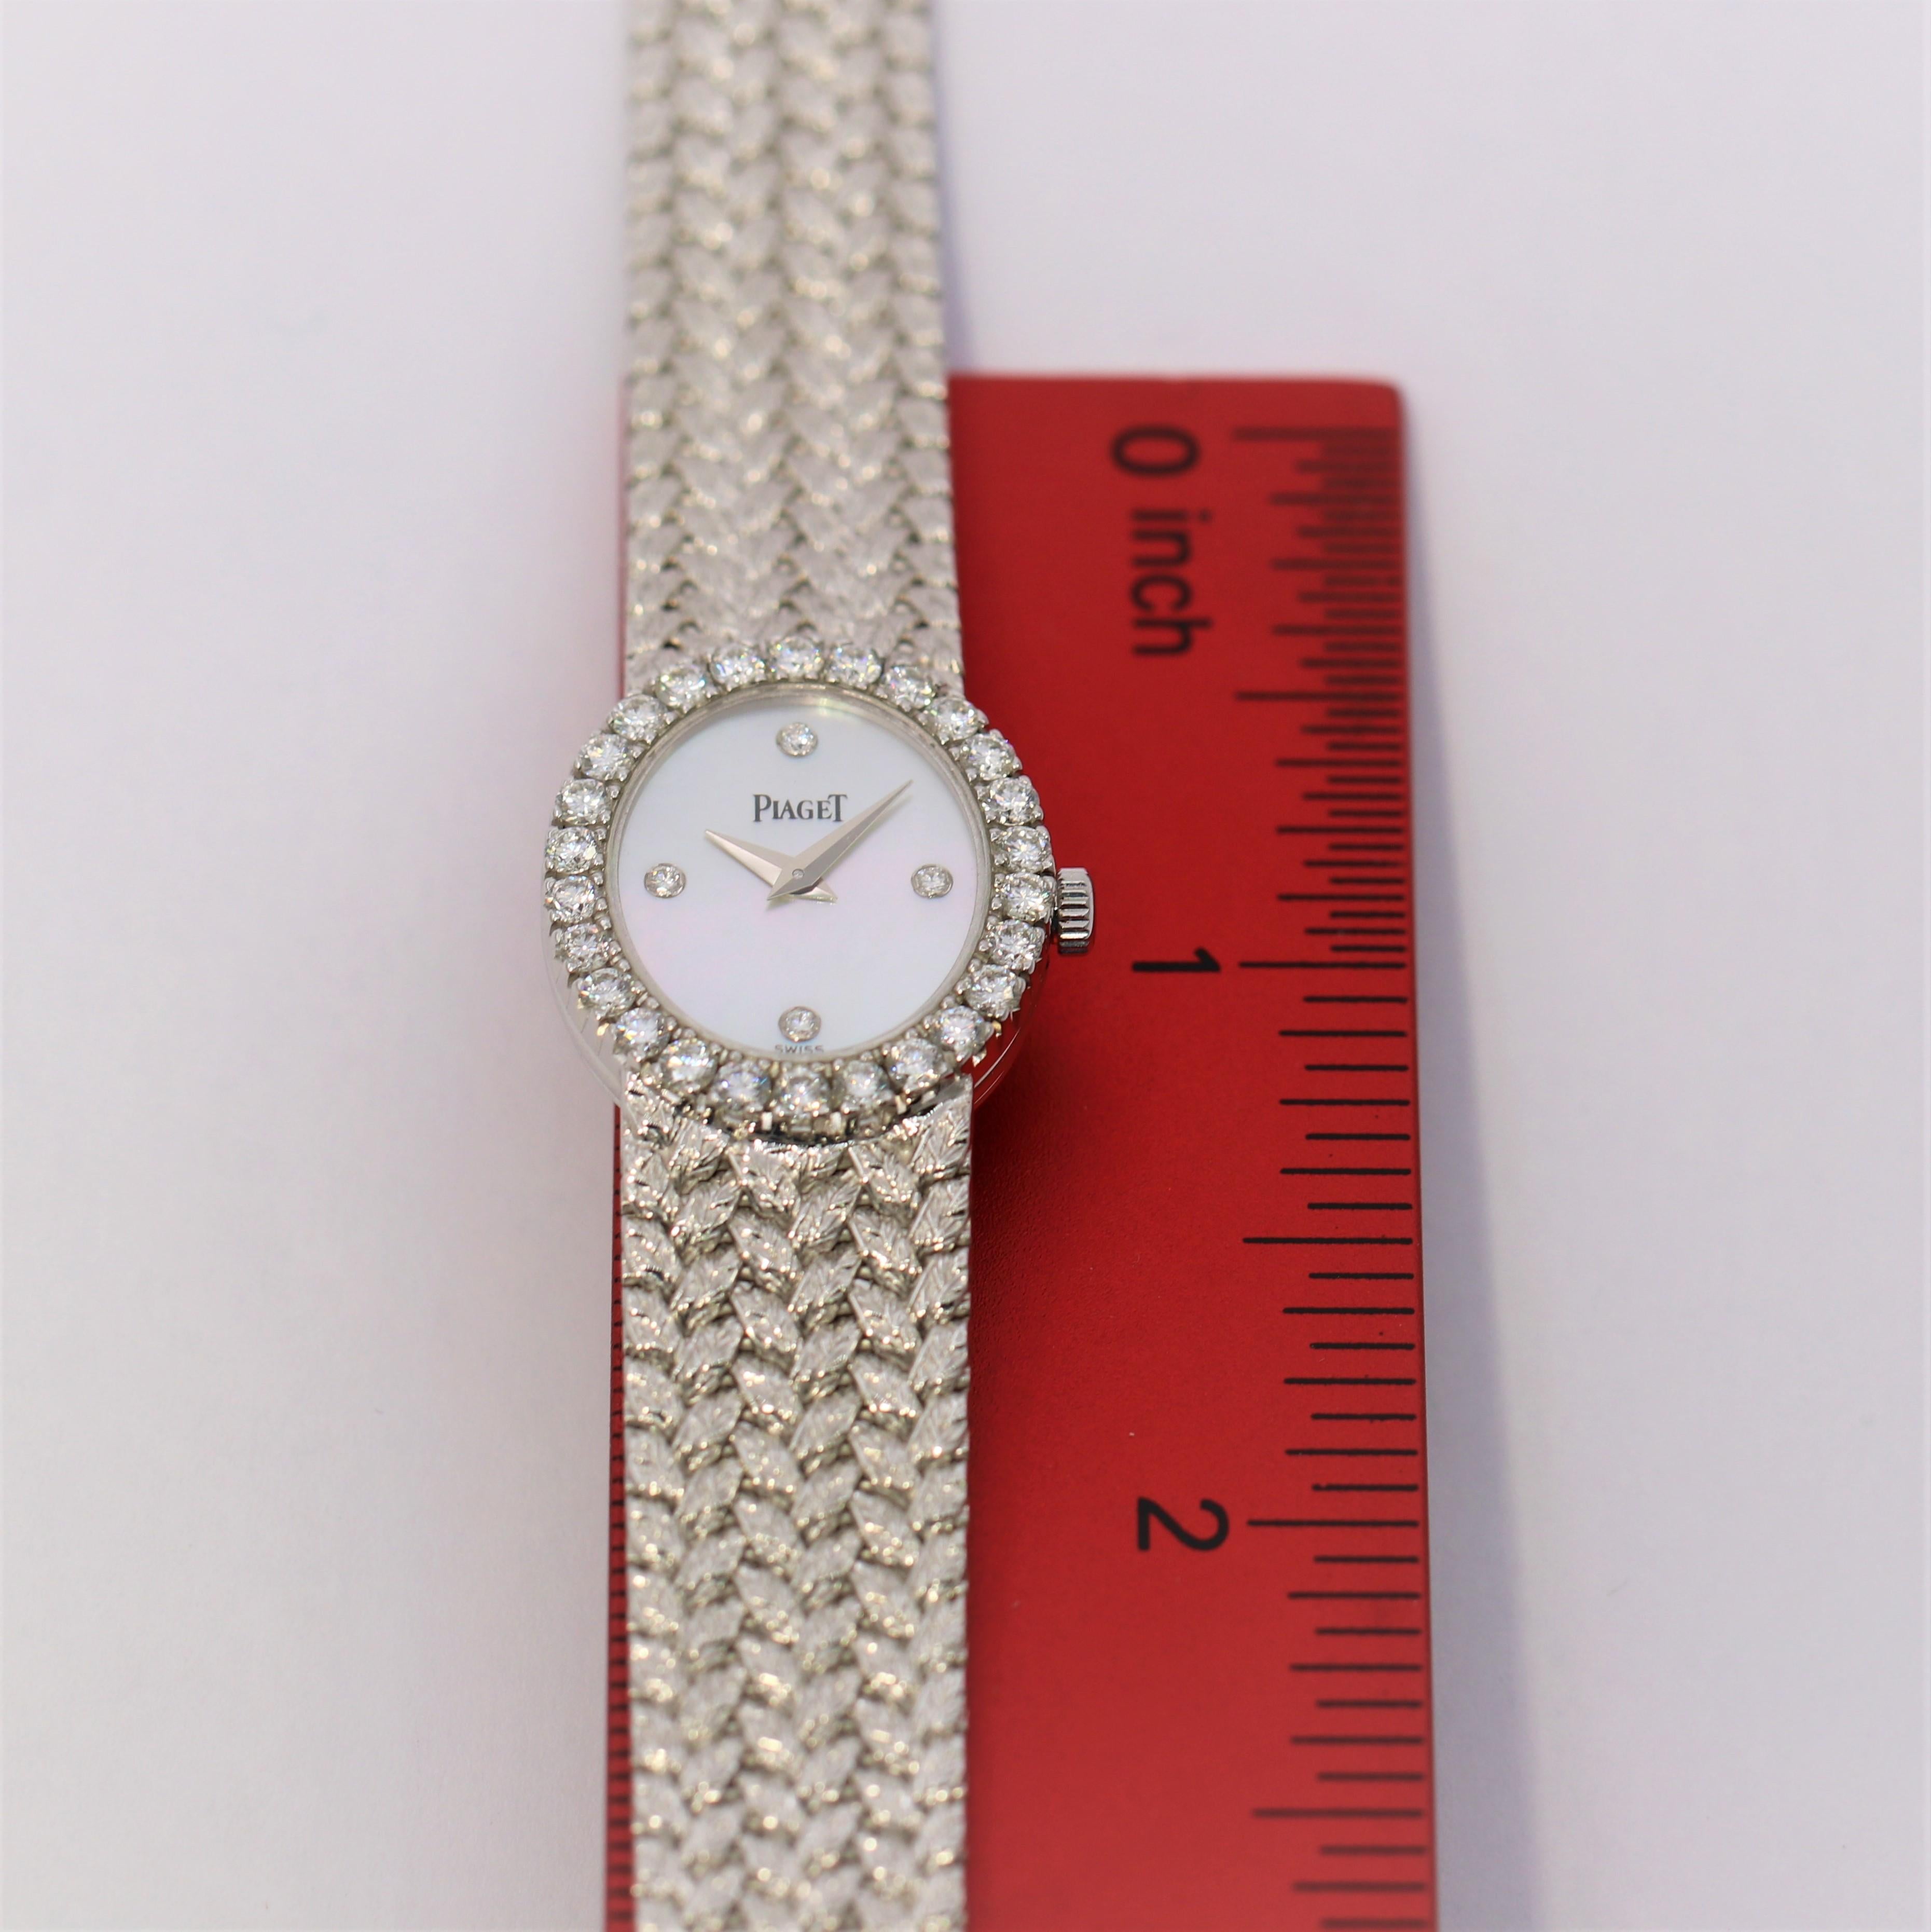 Ladies Piaget Petite Mother of Pearl Diamond Dial, White Gold Woven Band Watch 1